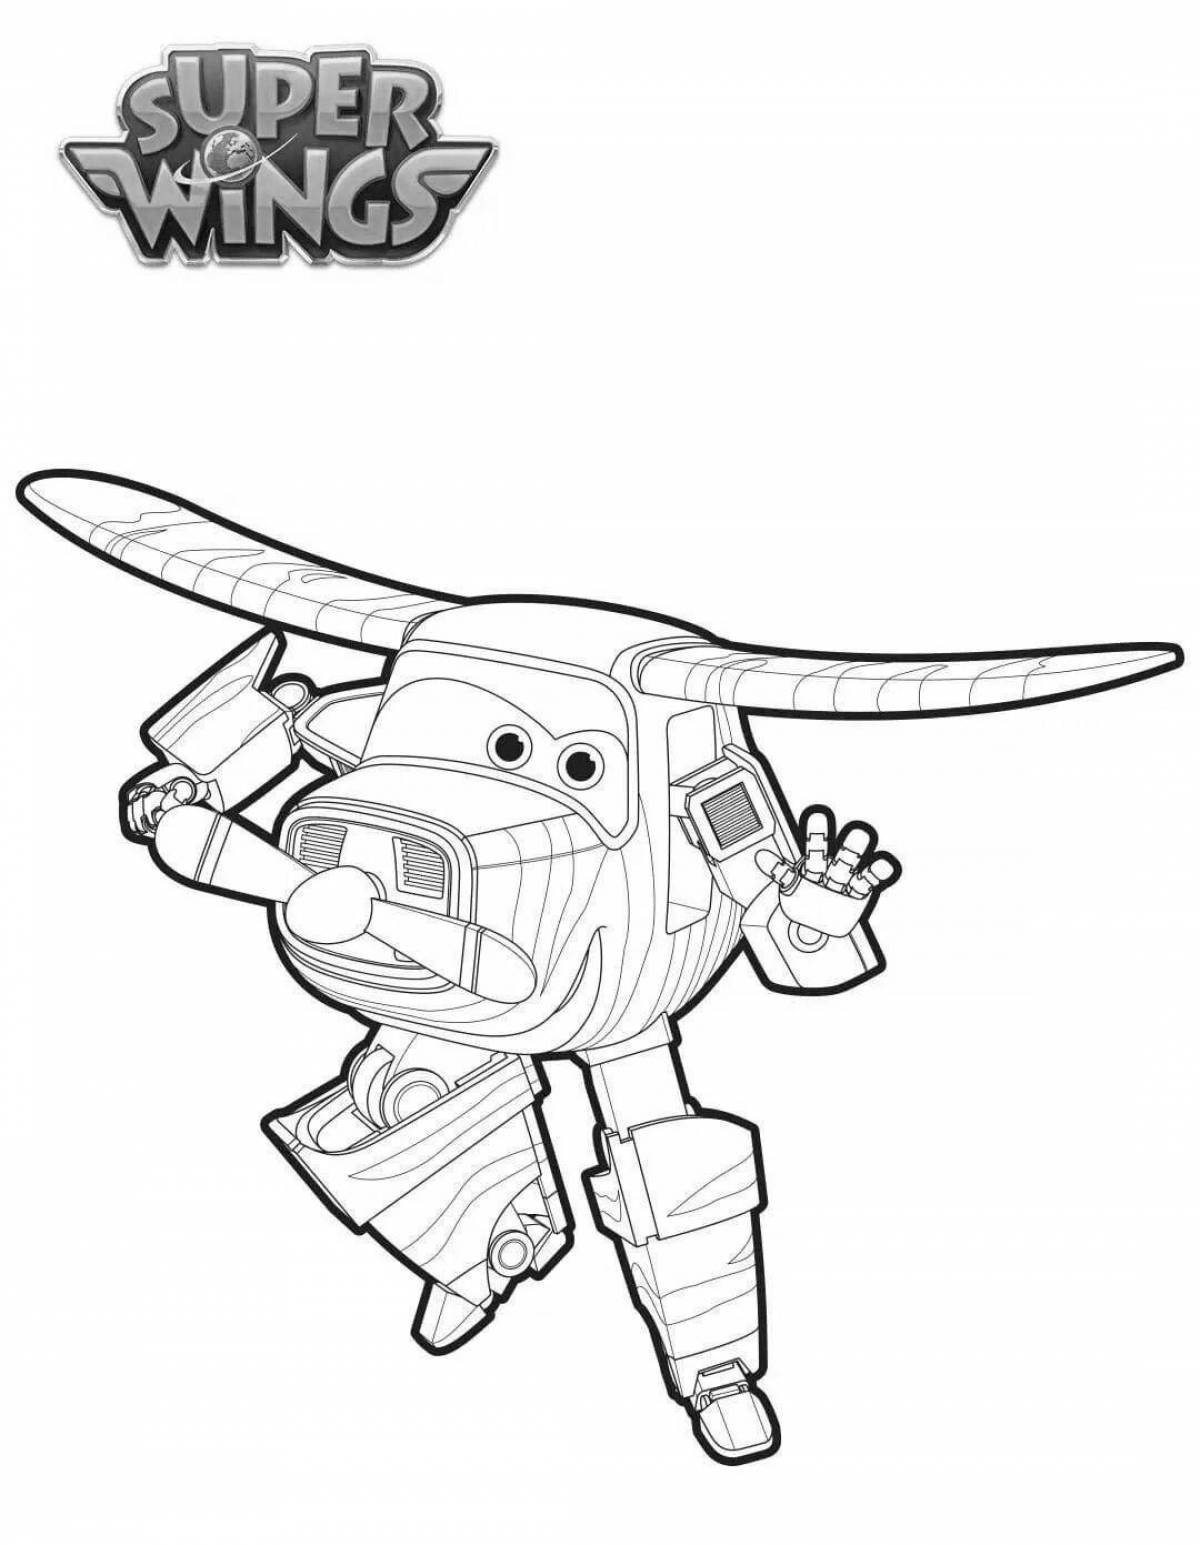 Gorgeous crystal super wings coloring page